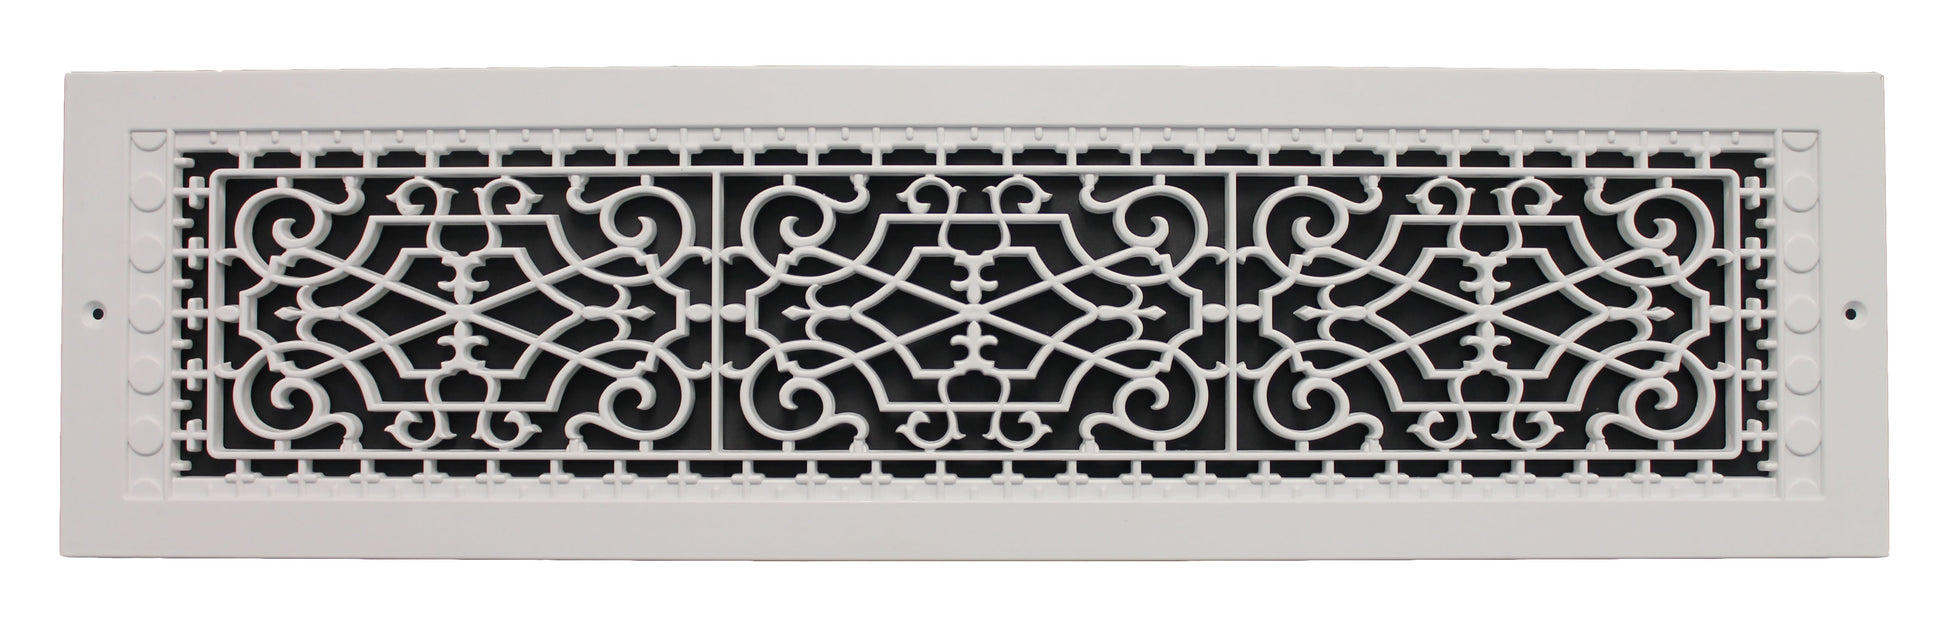 Victorian style decorative baseboard vent cover with the dimensions 6" in x 30" in